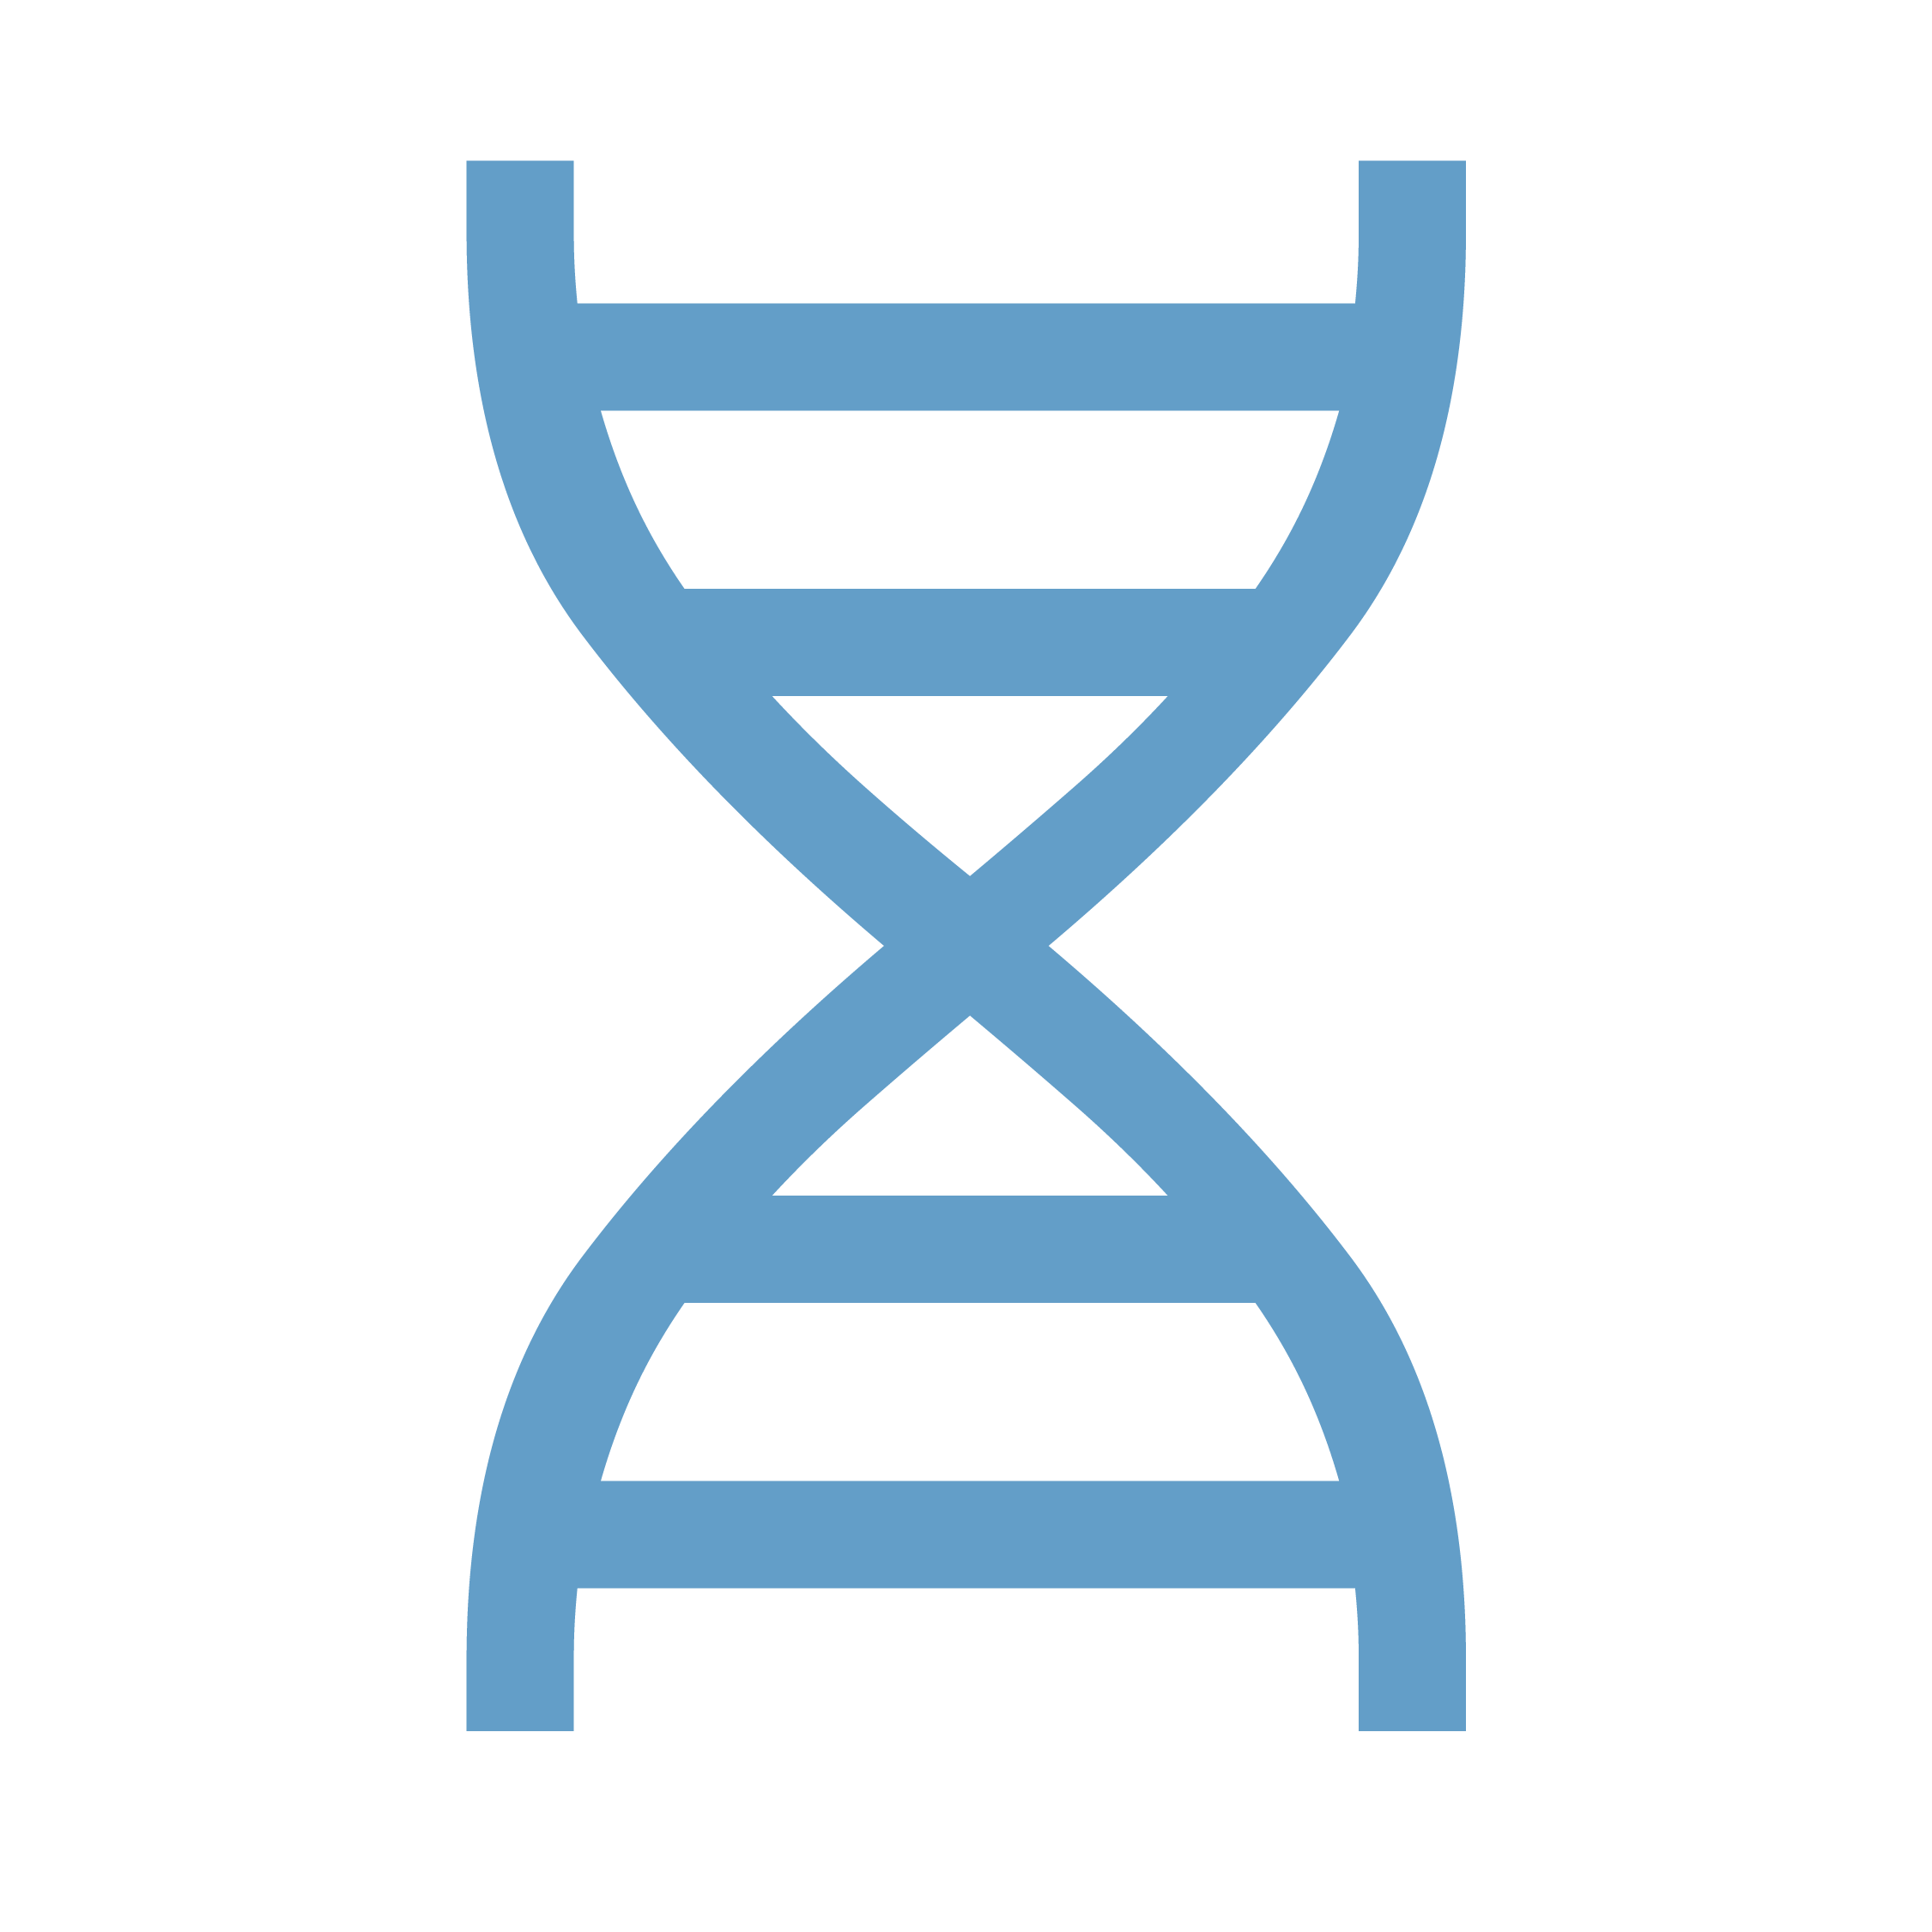 Image of a DNA Helix representing Recombinant